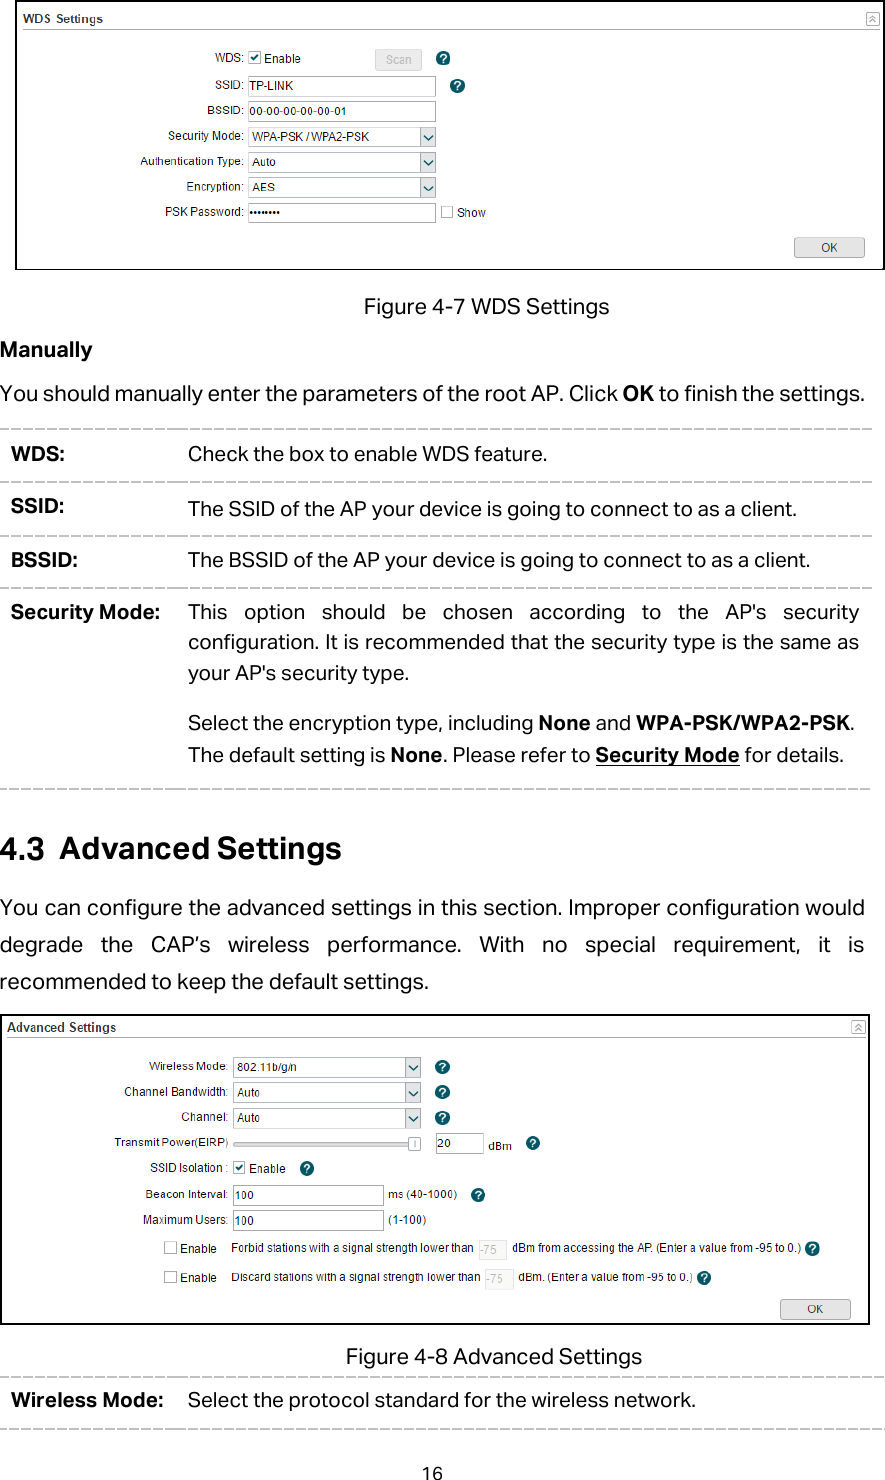  Figure 4-7 WDS Settings Manually You should manually enter the parameters of the root AP. Click OK to finish the settings. WDS: Check the box to enable WDS feature. SSID: The SSID of the AP your device is going to connect to as a client. BSSID: The BSSID of the AP your device is going to connect to as a client. Security Mode: This option should be chosen according to the AP&apos;s security configuration. It is recommended that the security type is the same as your AP&apos;s security type.   Select the encryption type, including None and WPA-PSK/WPA2-PSK. The default setting is None. Please refer to Security Mode for details.  Advanced Settings You can configure the advanced settings in this section. Improper configuration would degrade the CAP’s wireless performance. With no special requirement, it is recommended to keep the default settings.  Figure 4-8 Advanced Settings Wireless Mode: Select the protocol standard for the wireless network.   16 